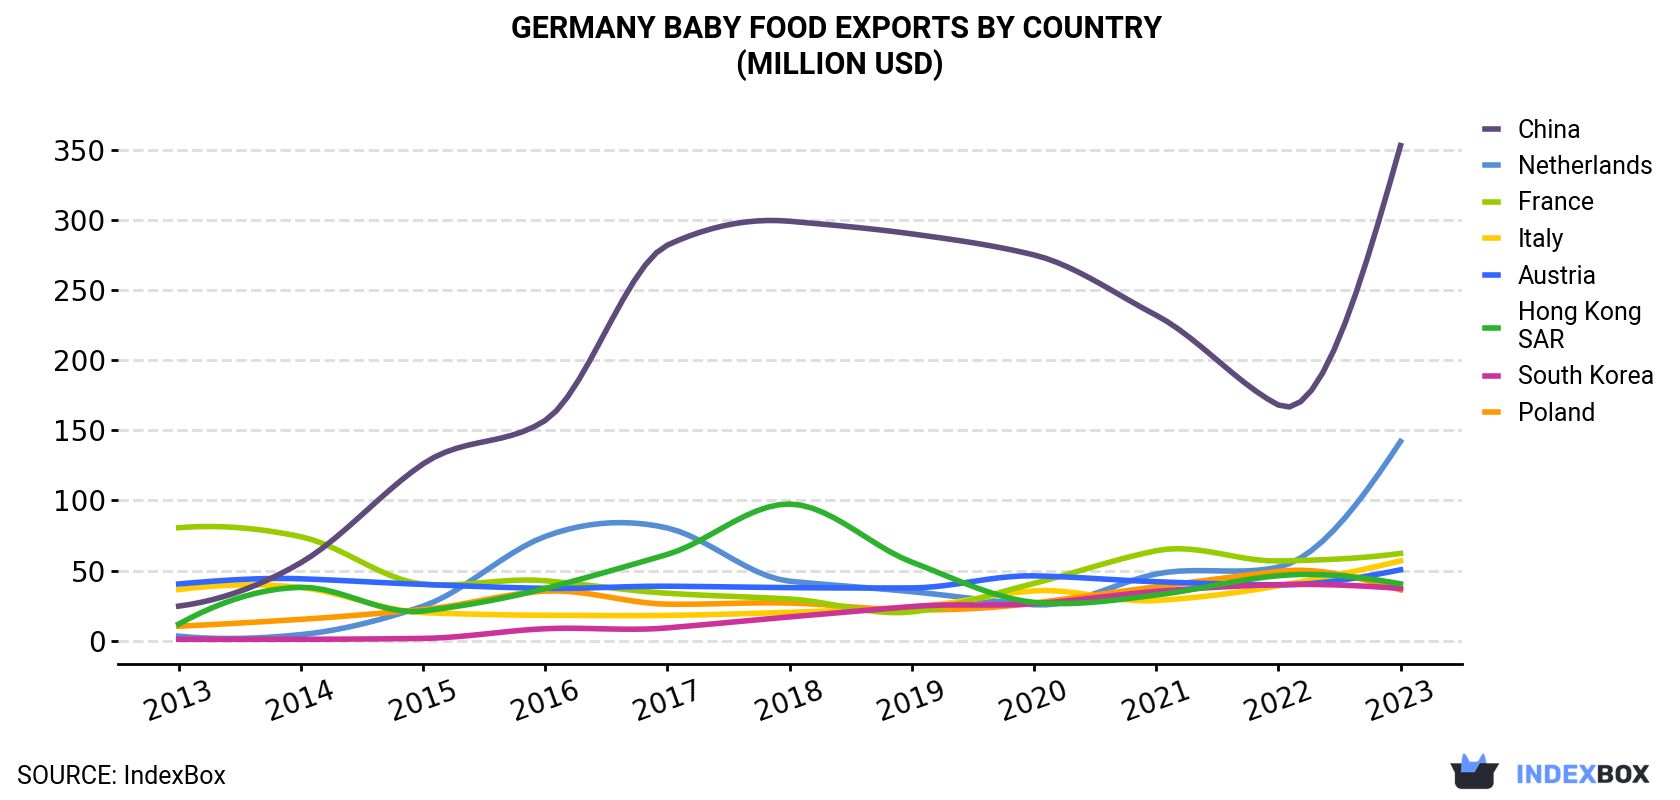 Germany Baby Food Exports By Country (Million USD)